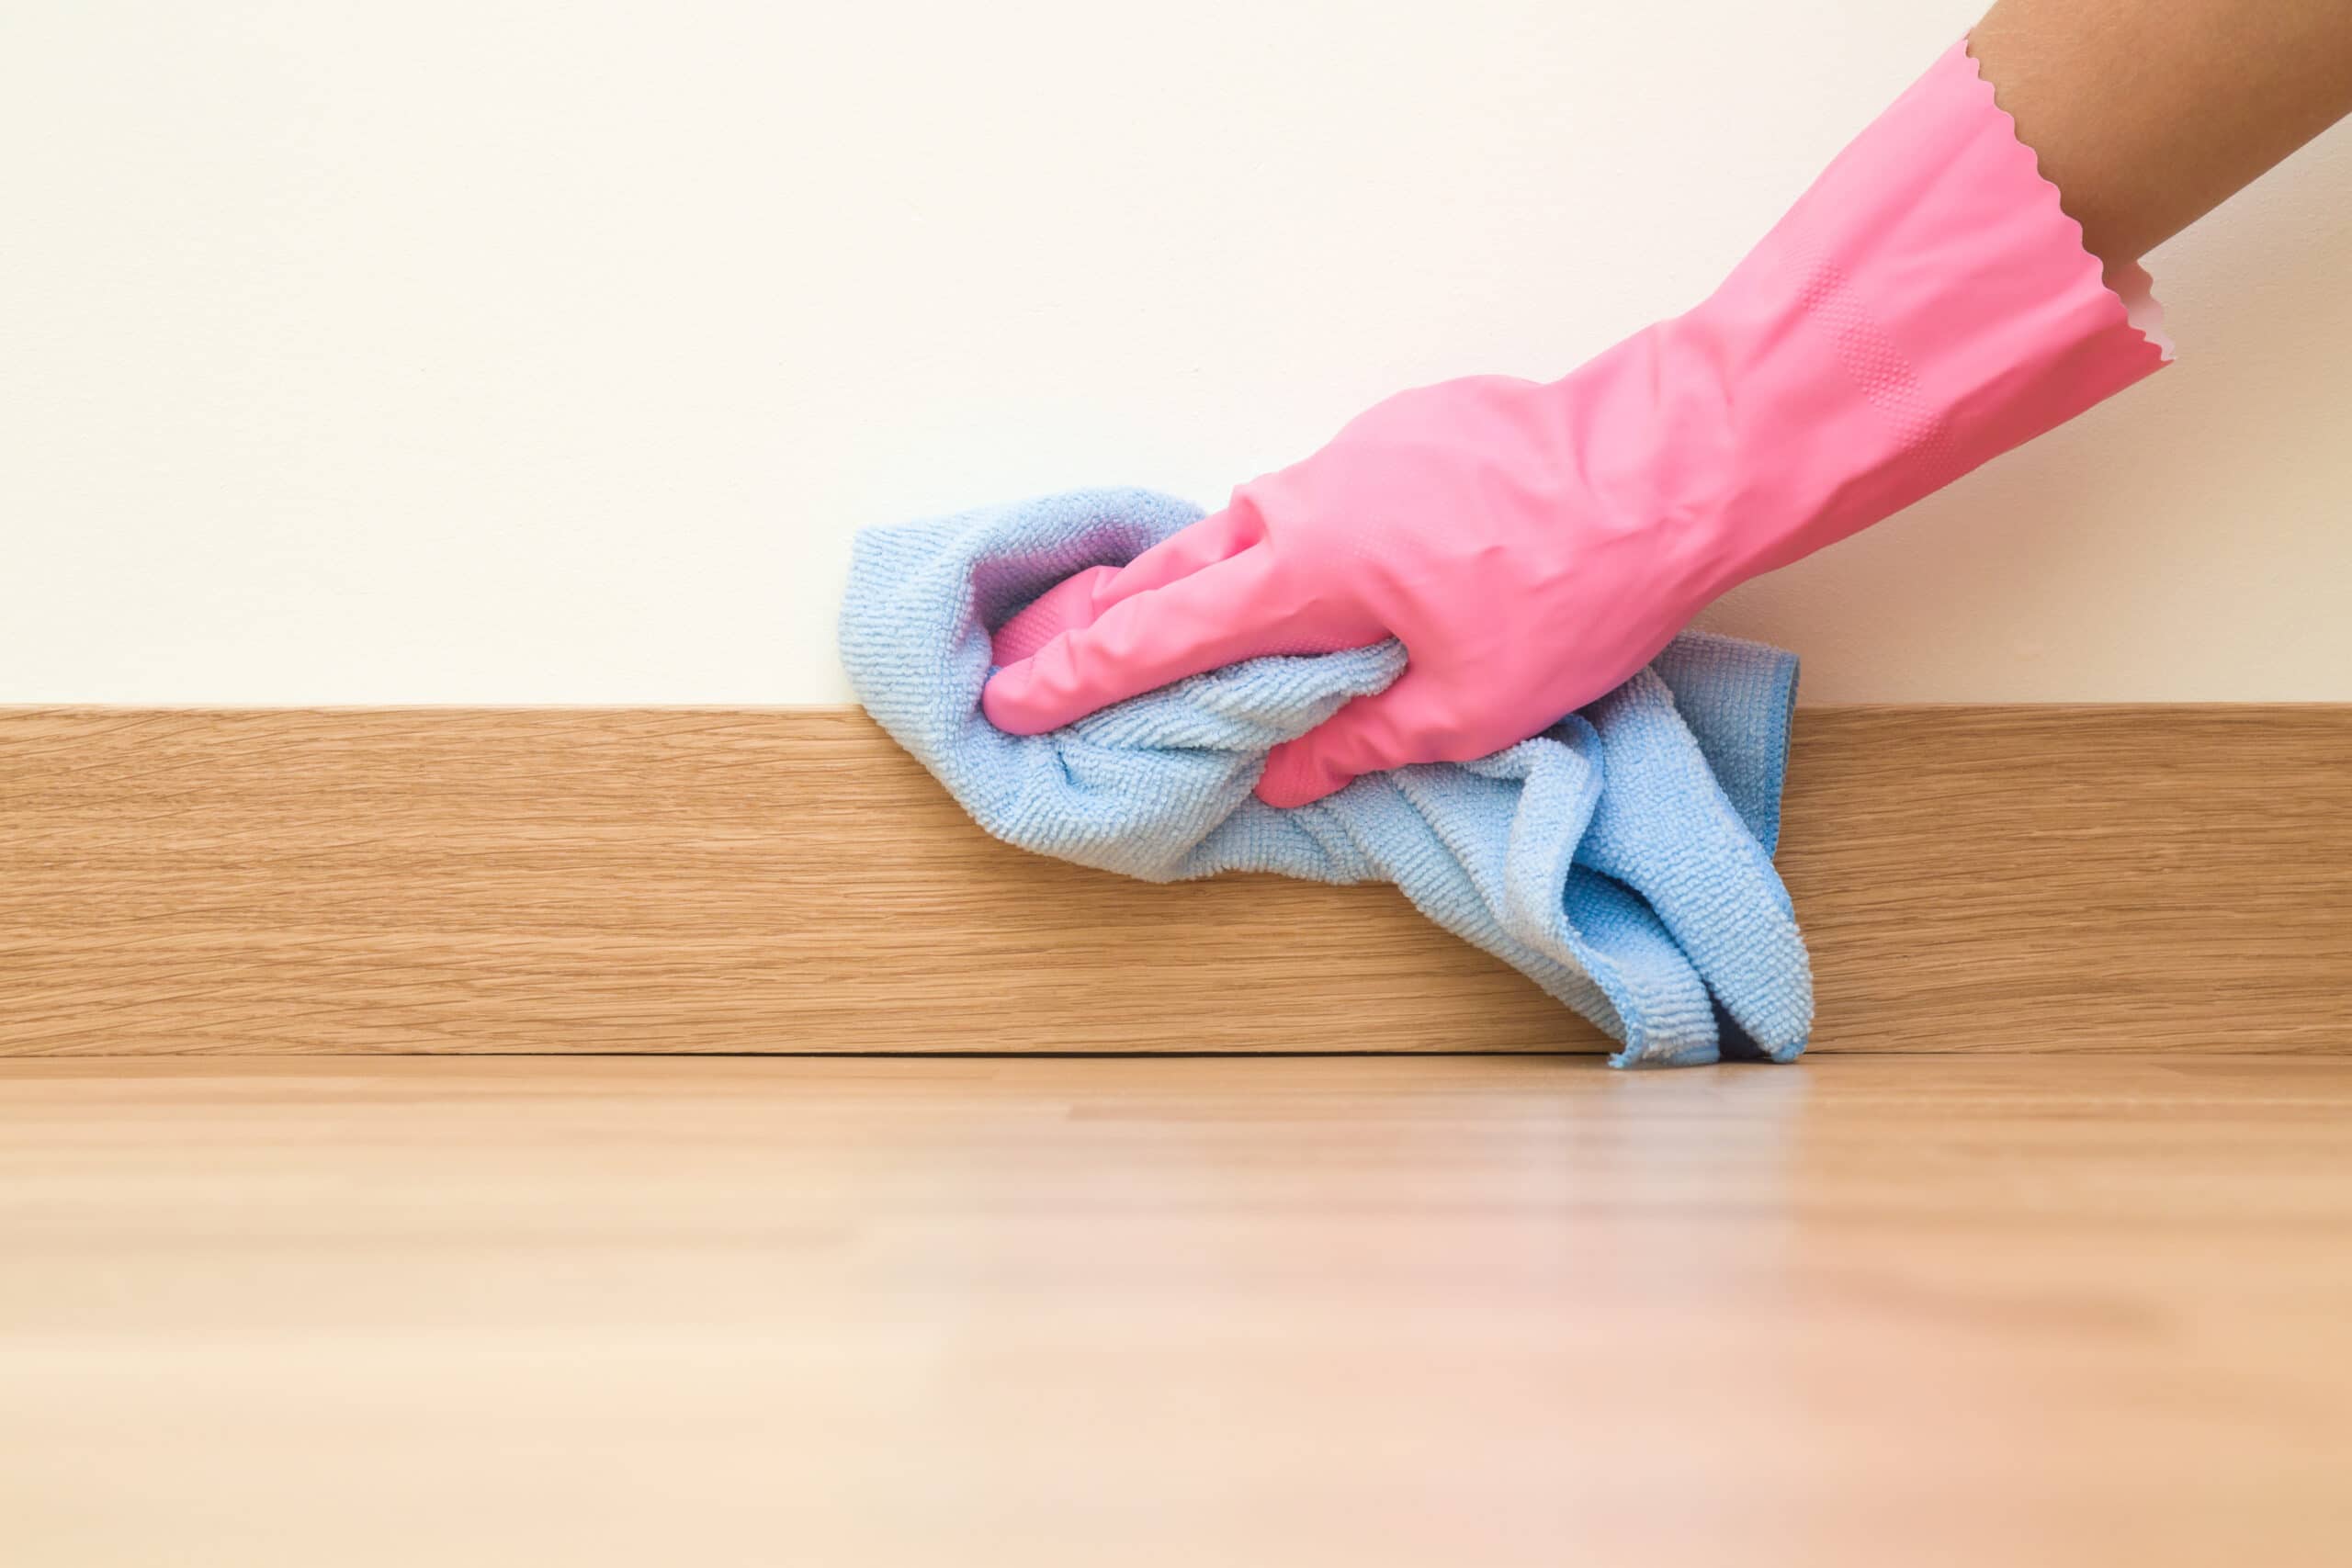 Someone wearing a pink glove cleaning baseboards with a microfiber cloth